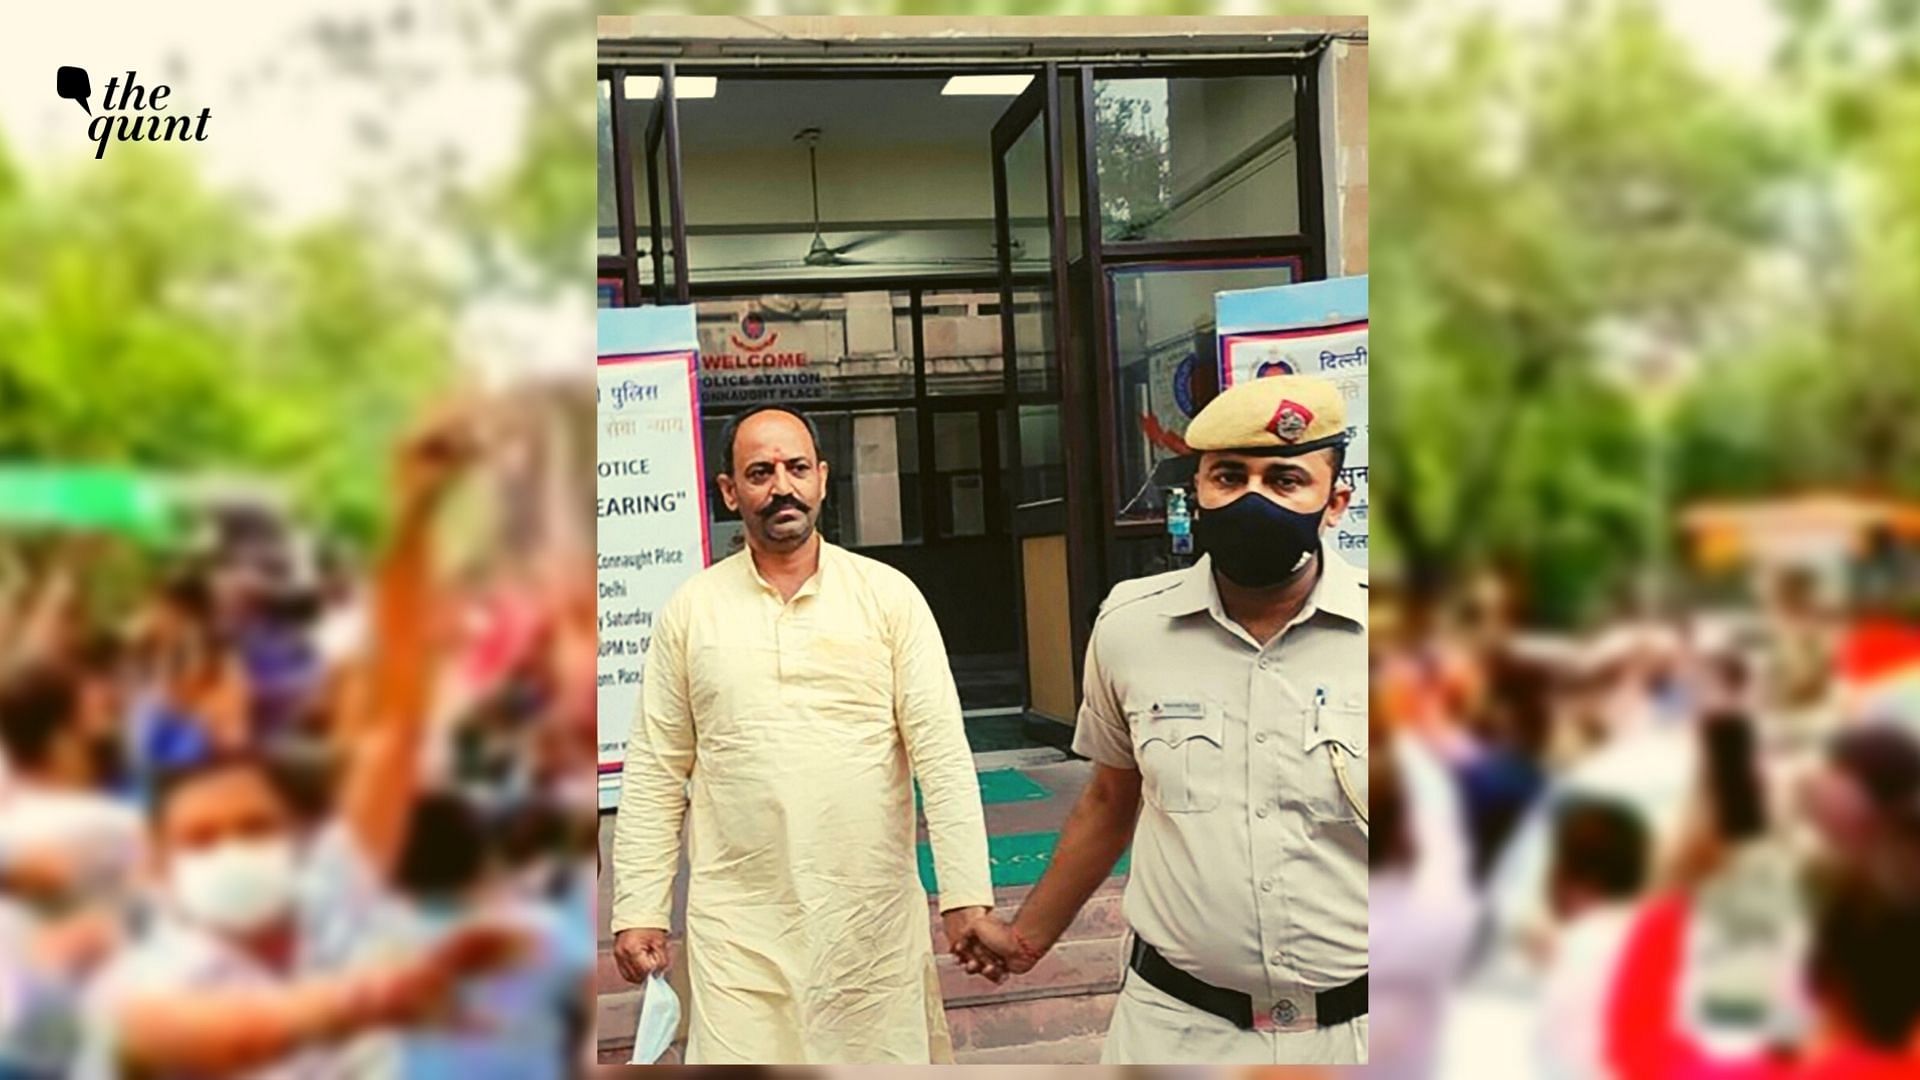 <div class="paragraphs"><p>Hindu Raksha Dal chief Bhupinder Tomar alias Pinki Chaudhary, one of the prime accused in the case of raising communal slogans at Delhi's Jantar Mantar, surrendered before the Delhi Police on Tuesday, 31 August.</p></div>